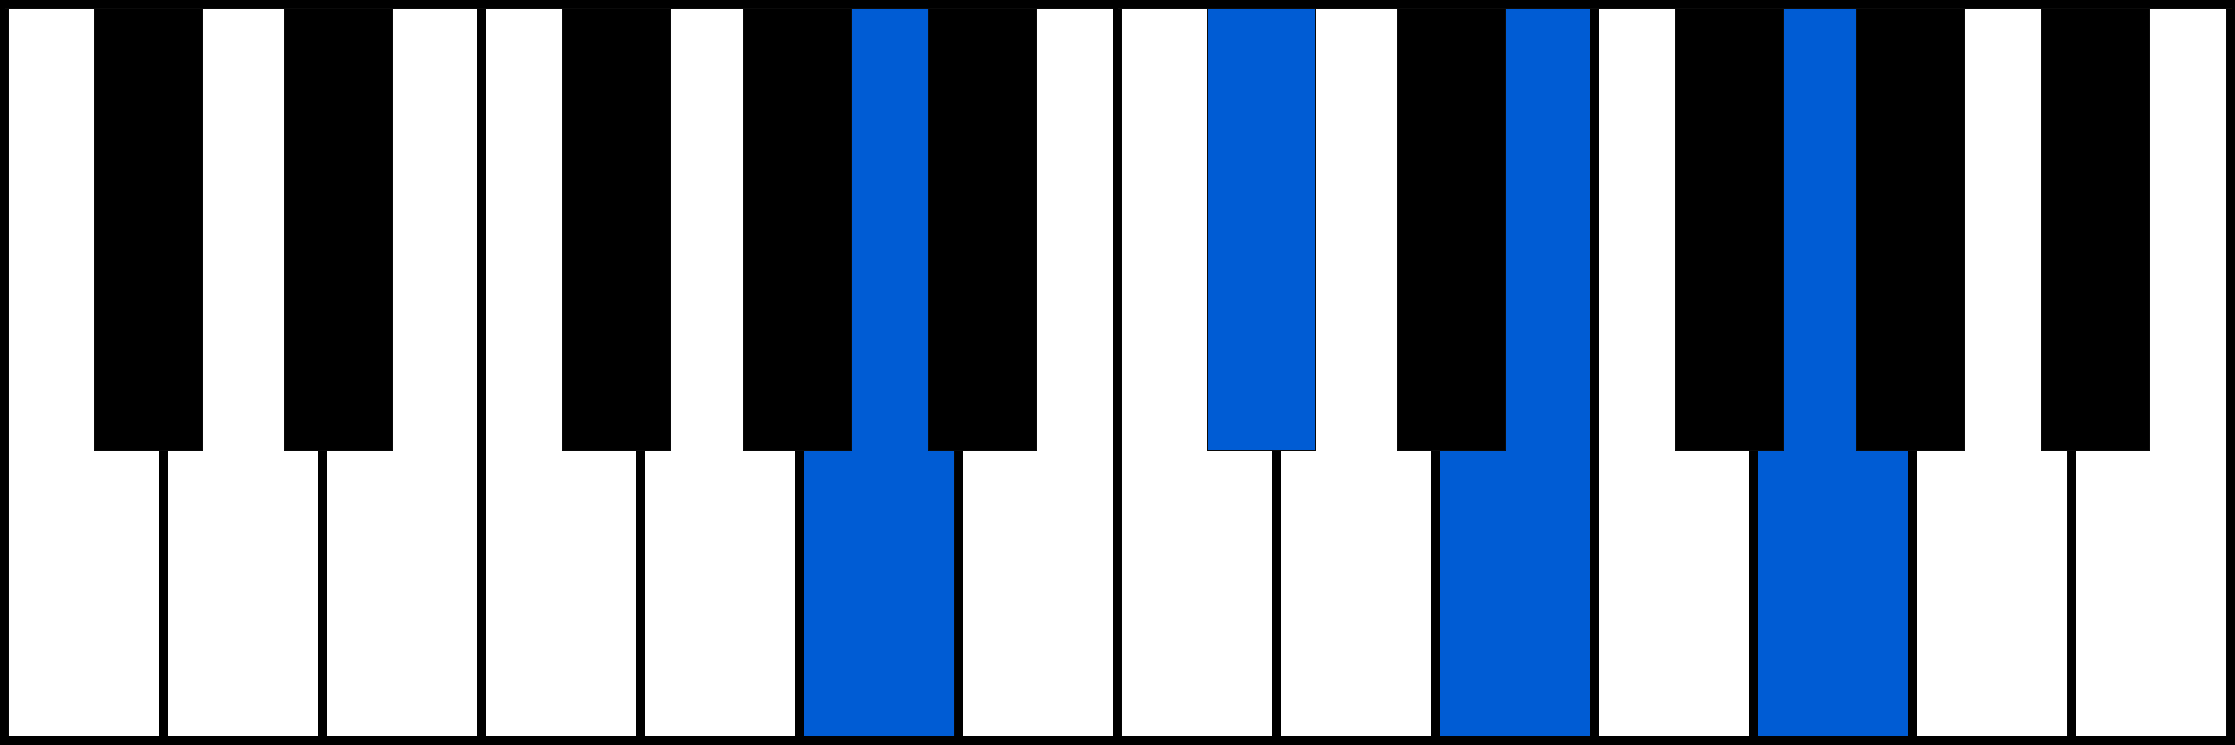 A7 piano chord fingering